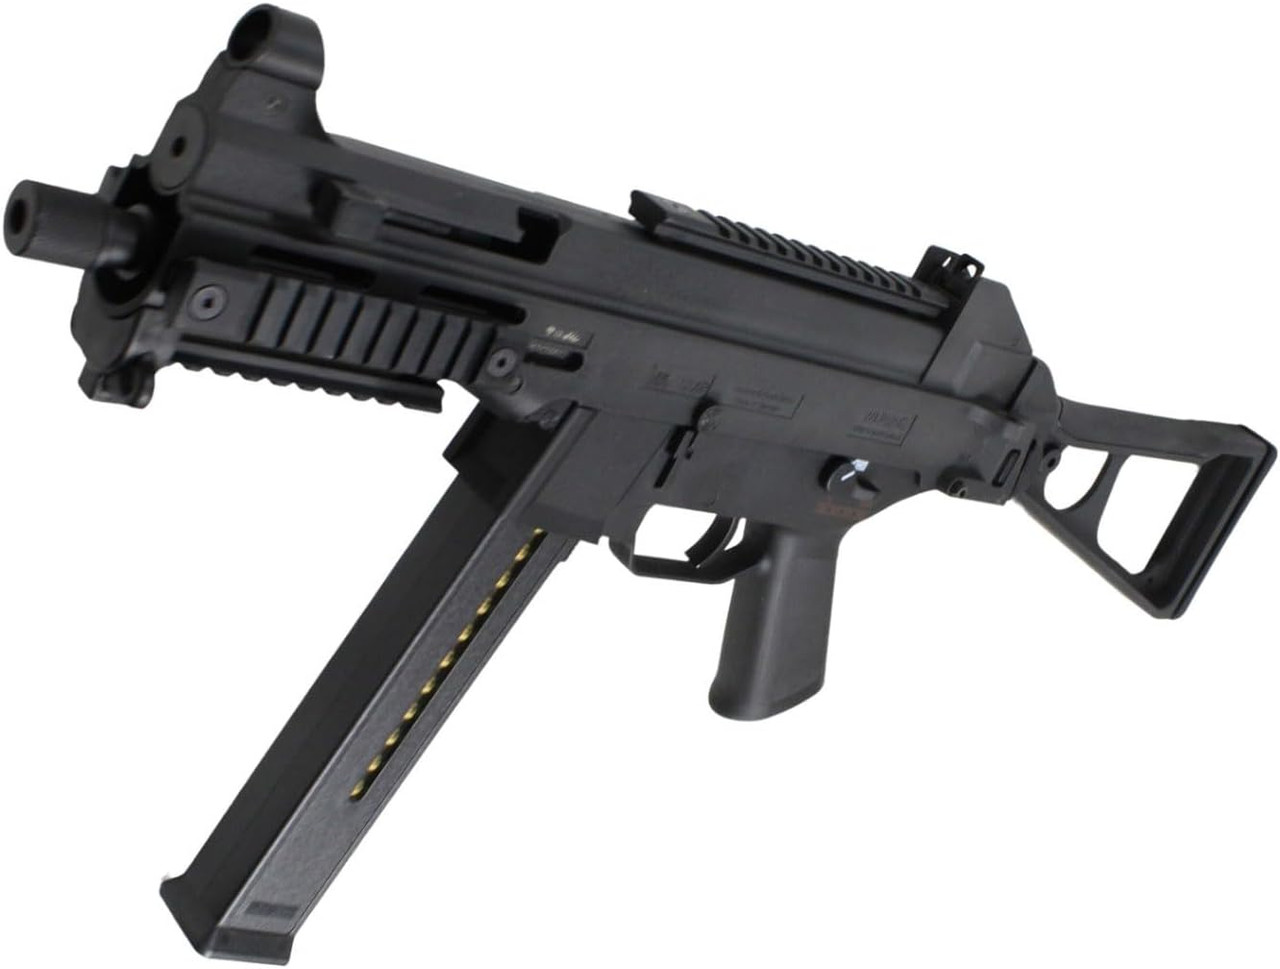 S&T UMP45 G3 Airsoft electric gun BK [with silencer & spare magazine]